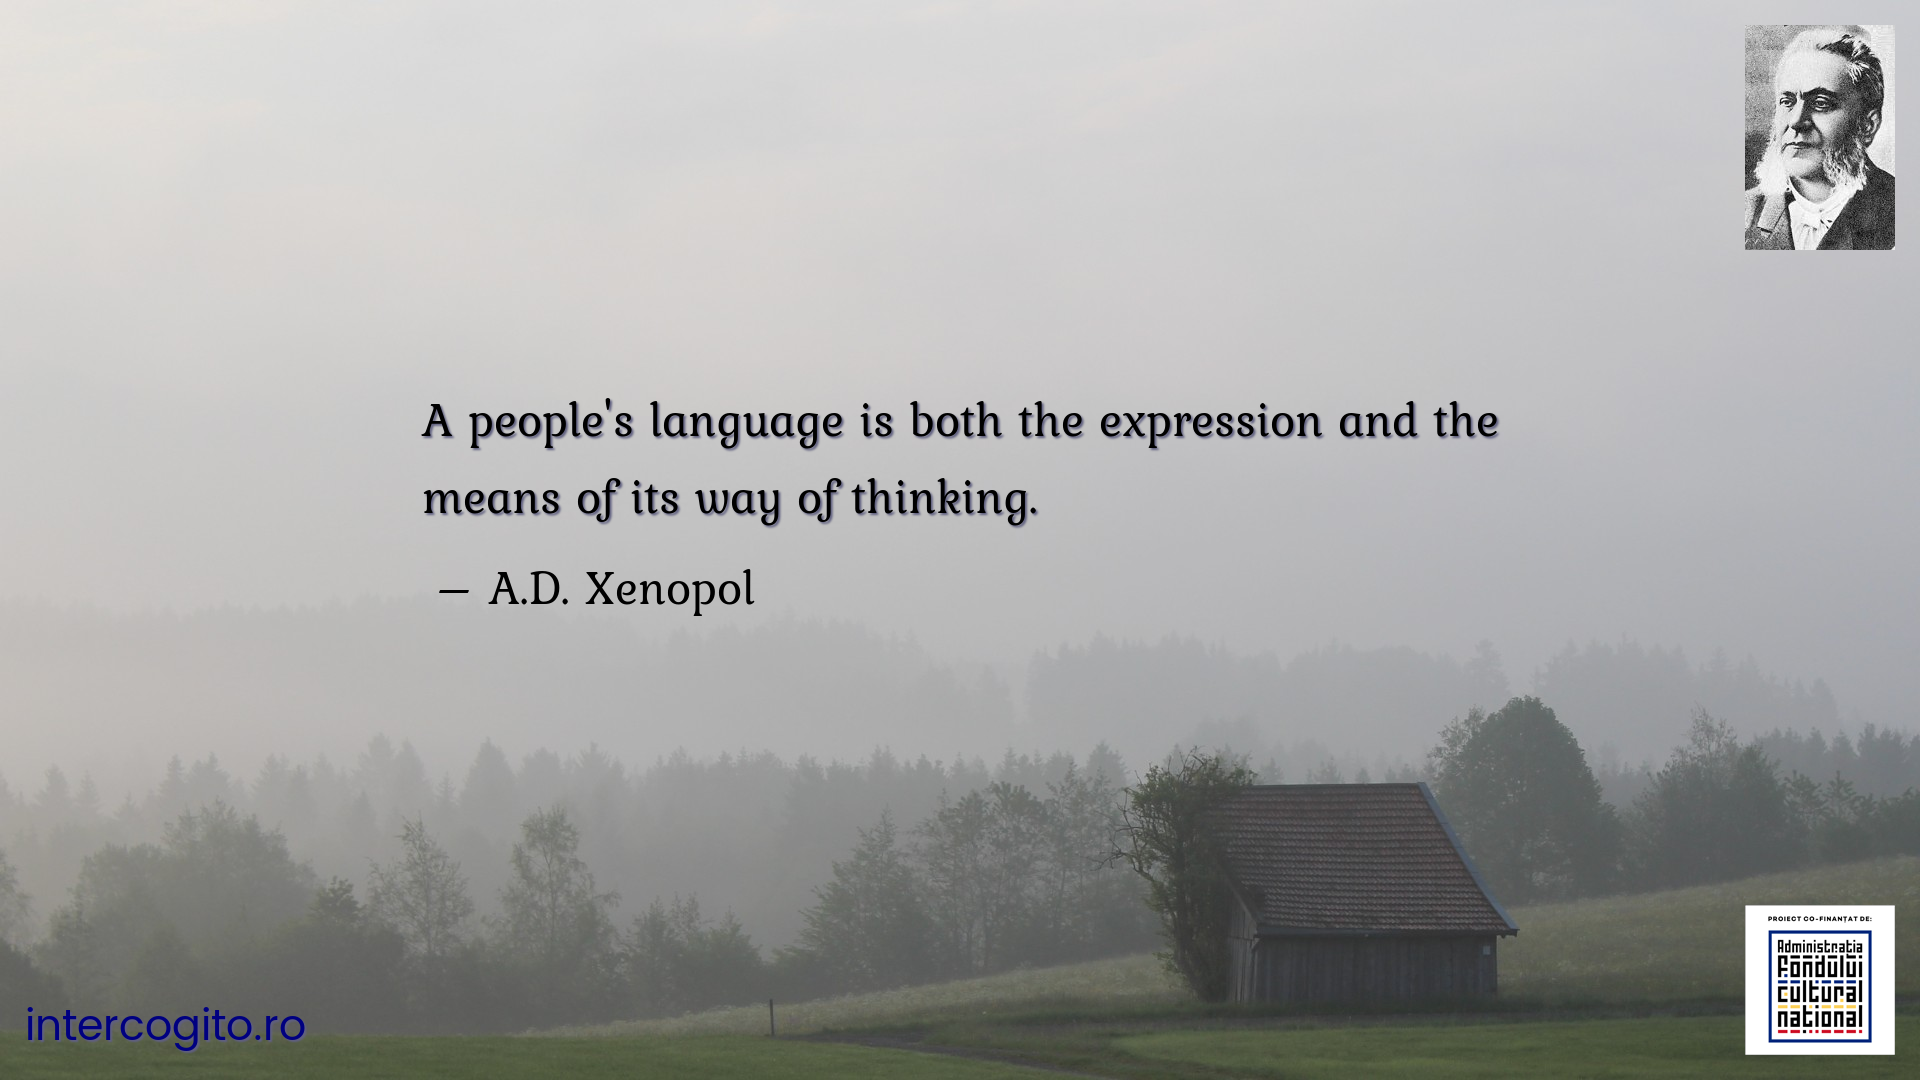 A people's language is both the expression and the means of its way of thinking.